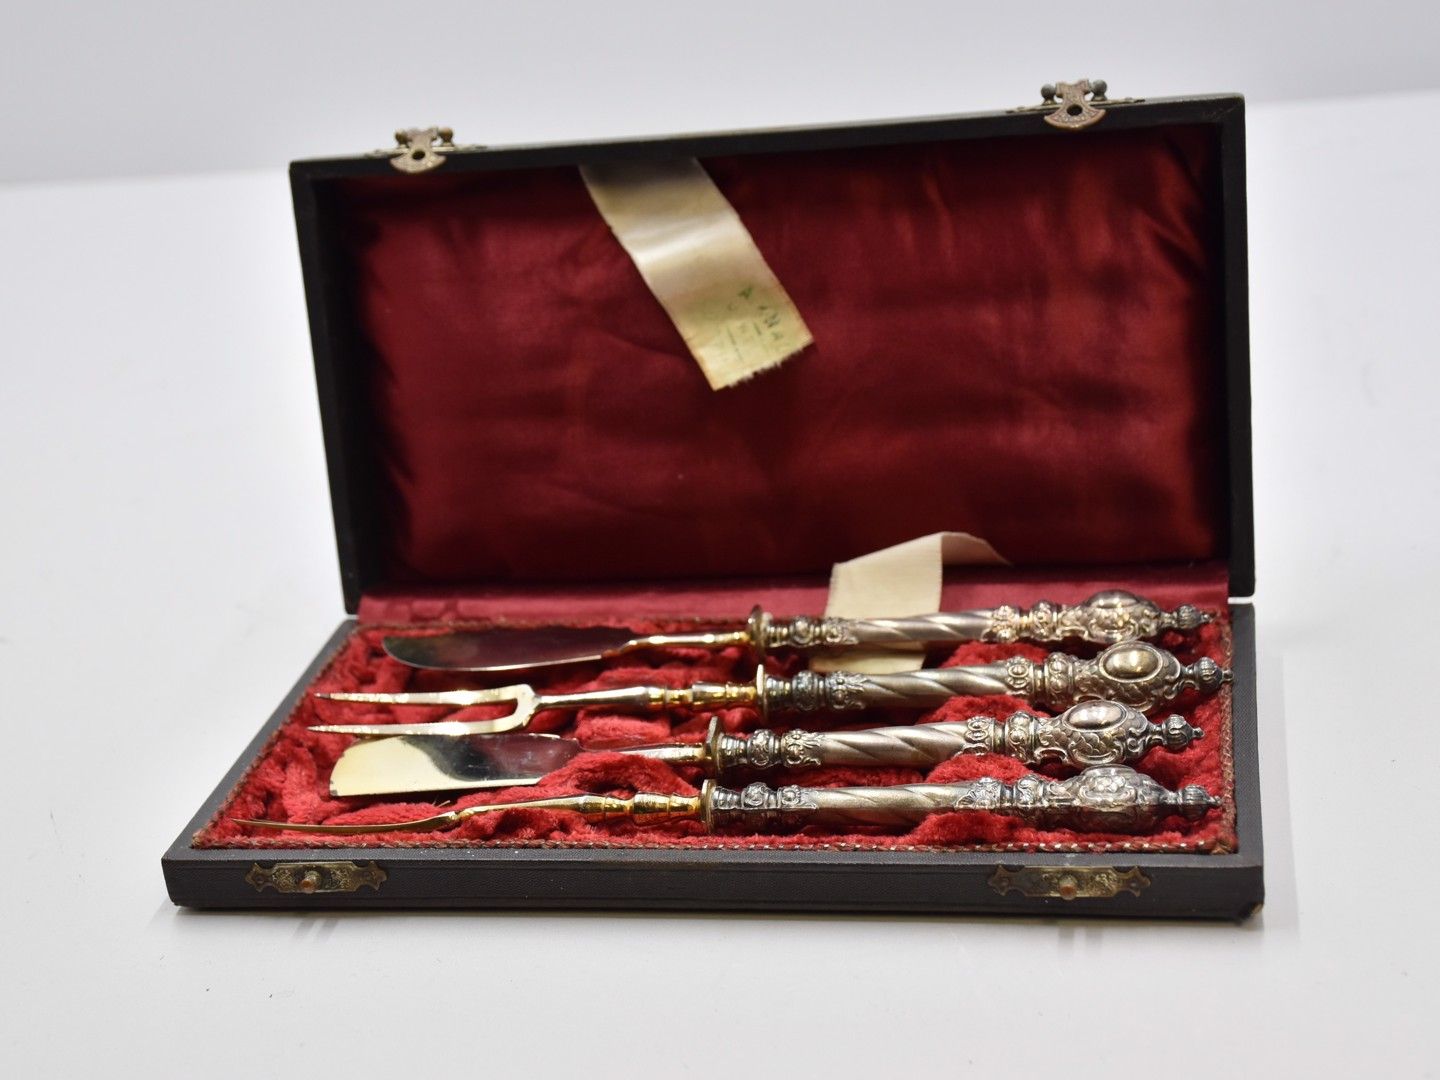 Null Cheese cutlery in silver in a case